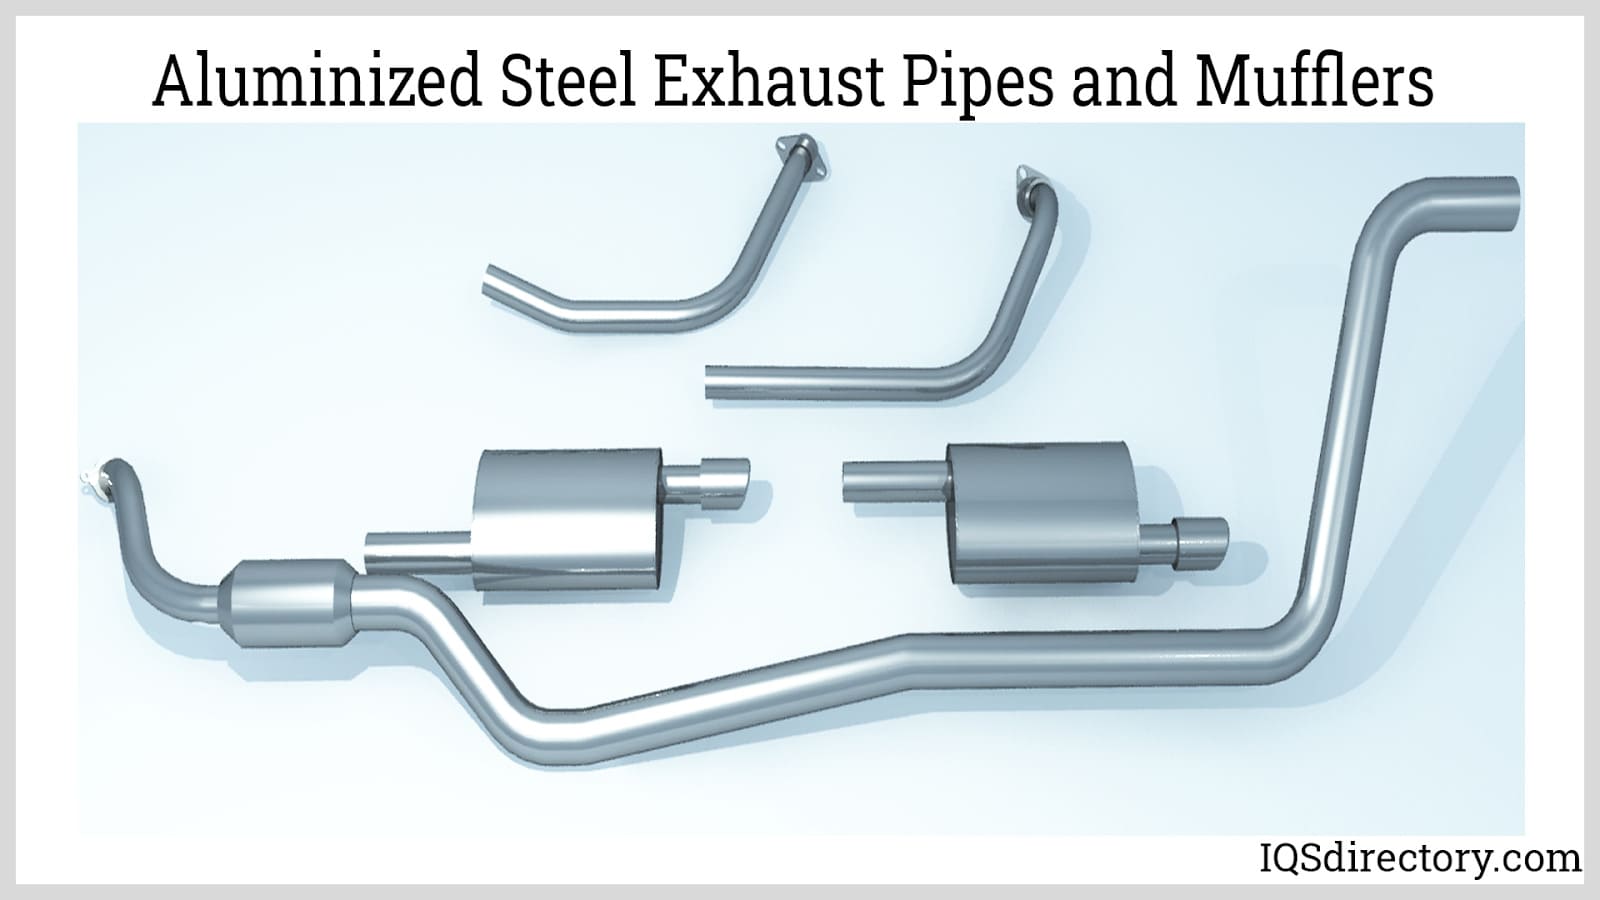 Aluminized Steel Exhaust Pipes and Mufflers